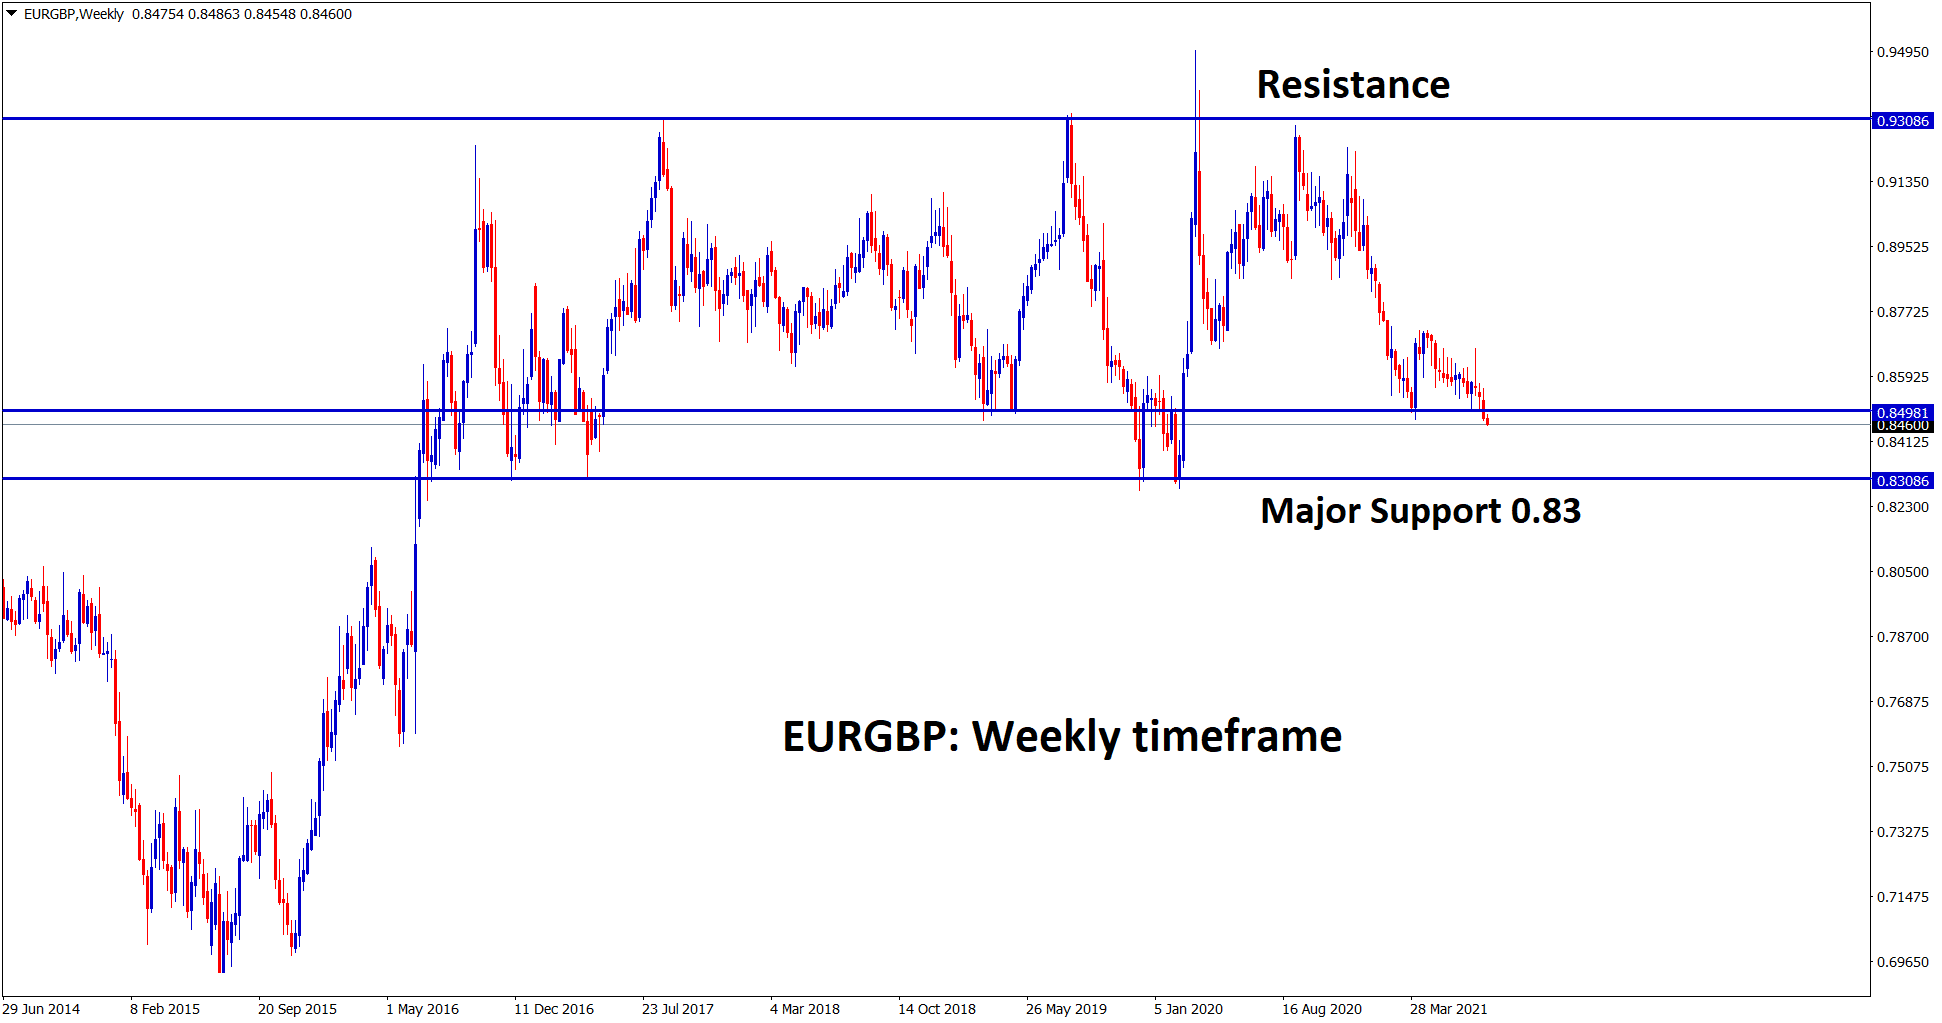 EURGBP broken the recent support and falling now to the next major support area 0.83